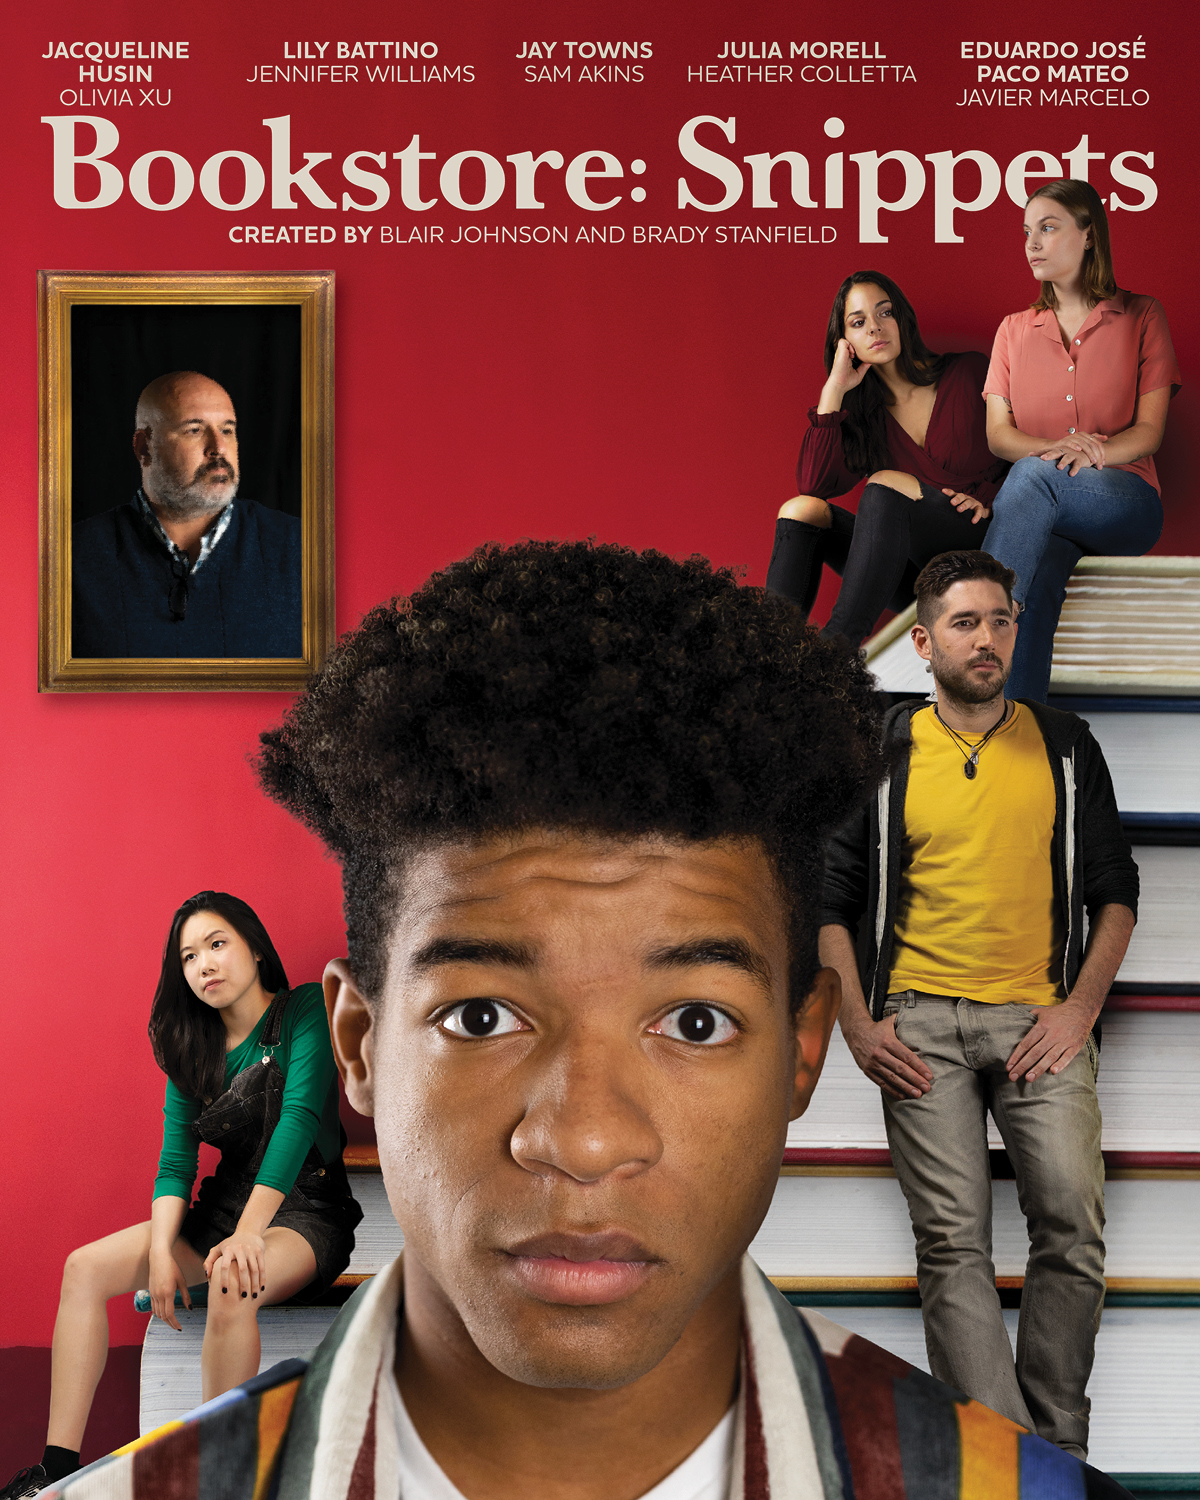 Bookstore: Snippets